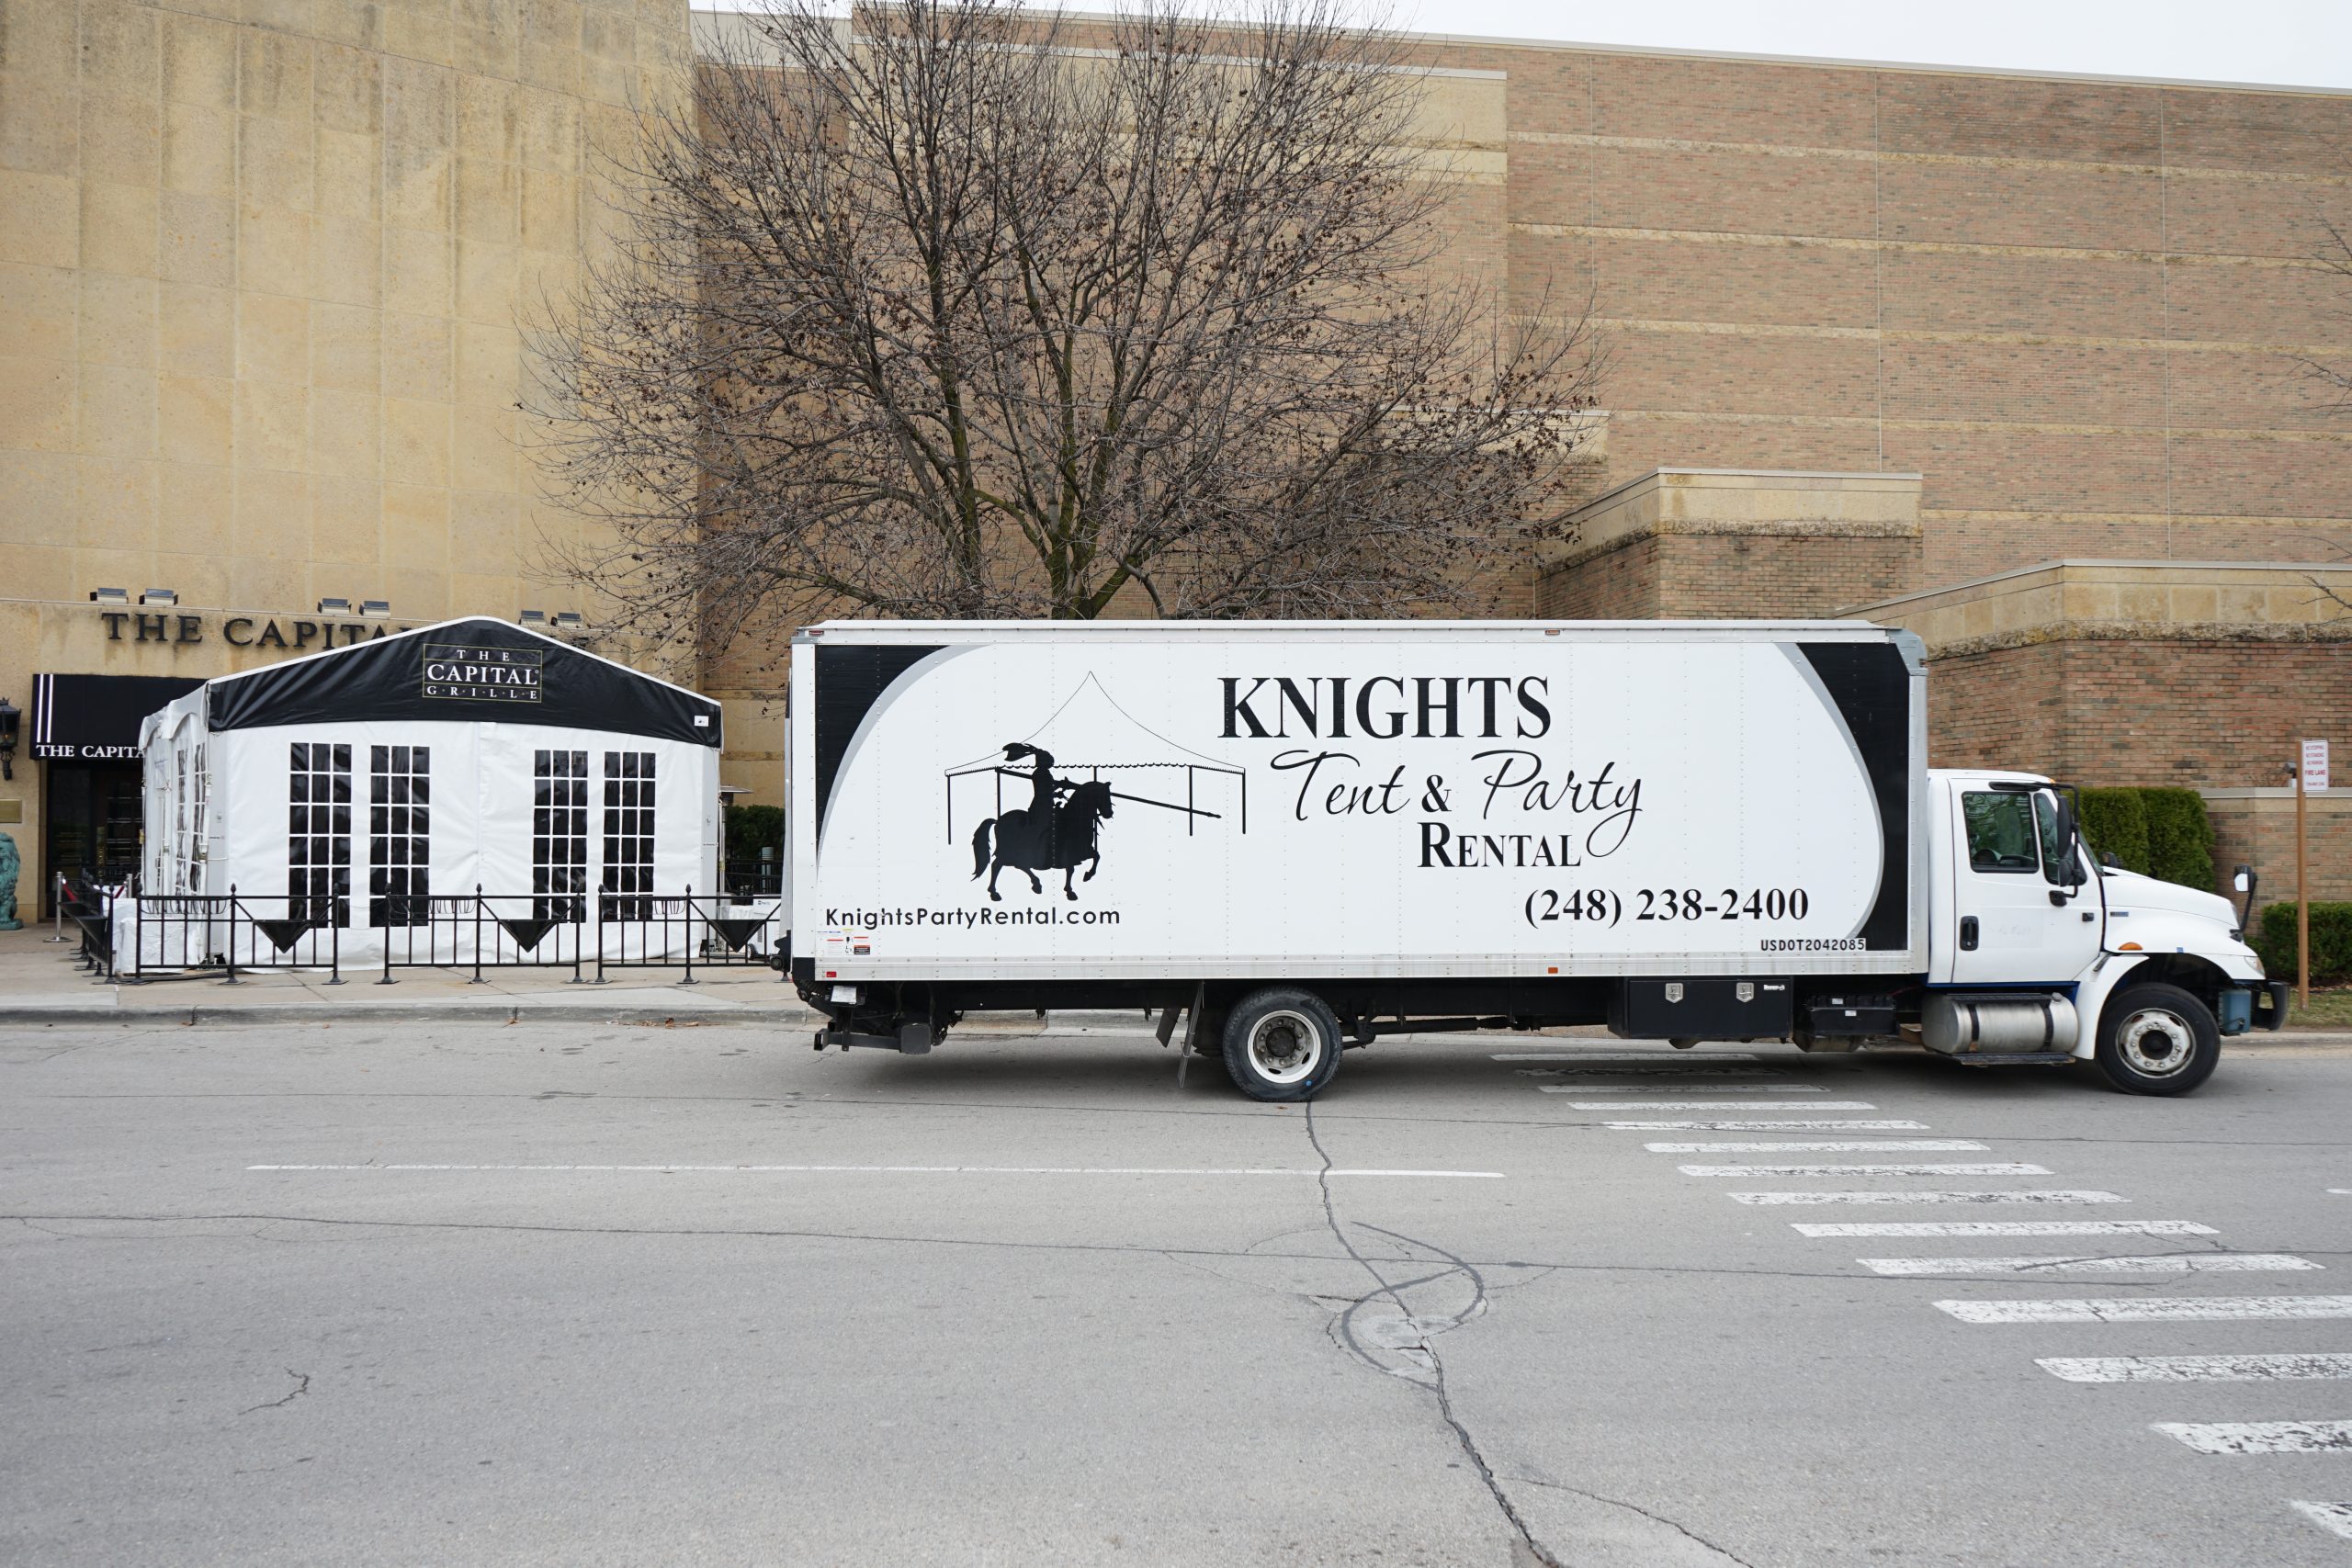 Knight's Tent and Party Rental Truck